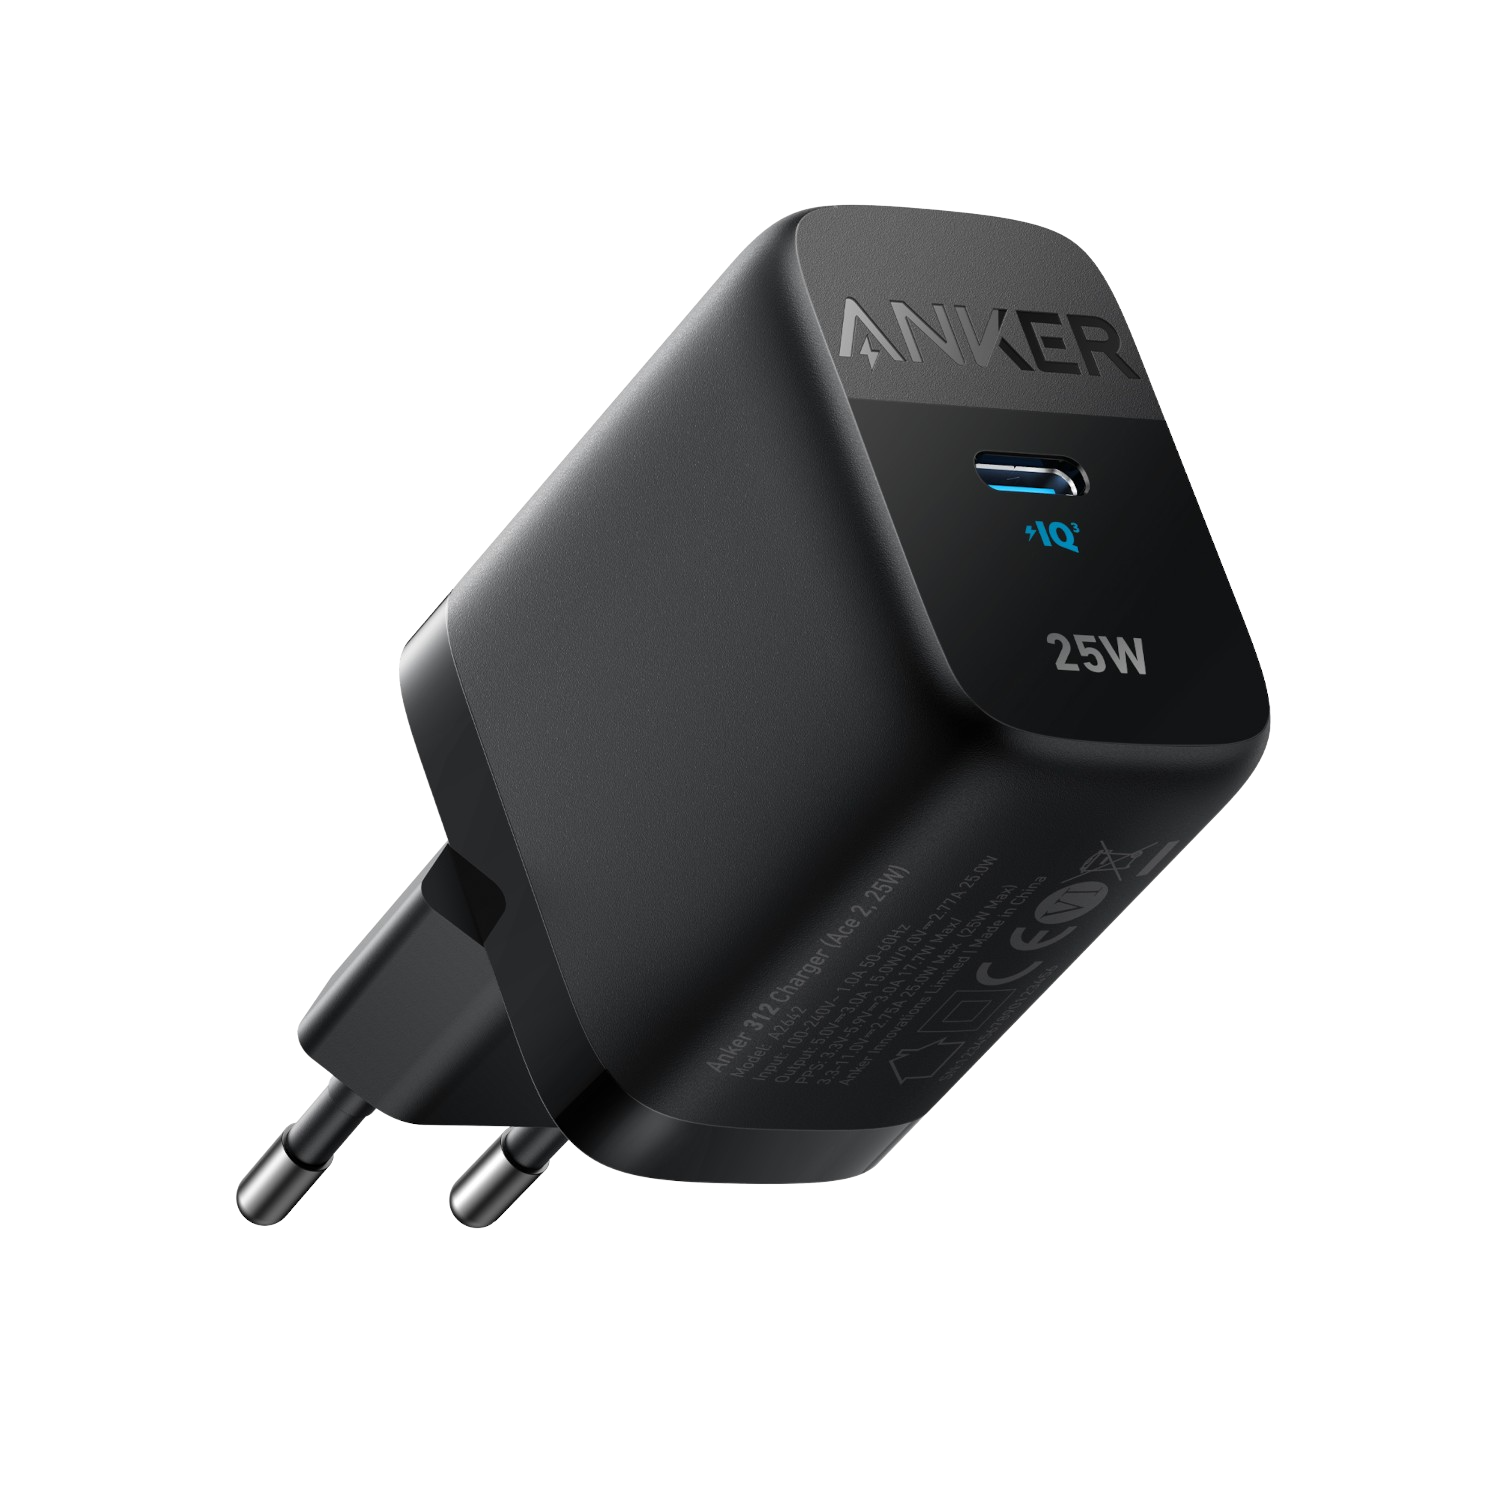 Anker 25w Charging For Samsung